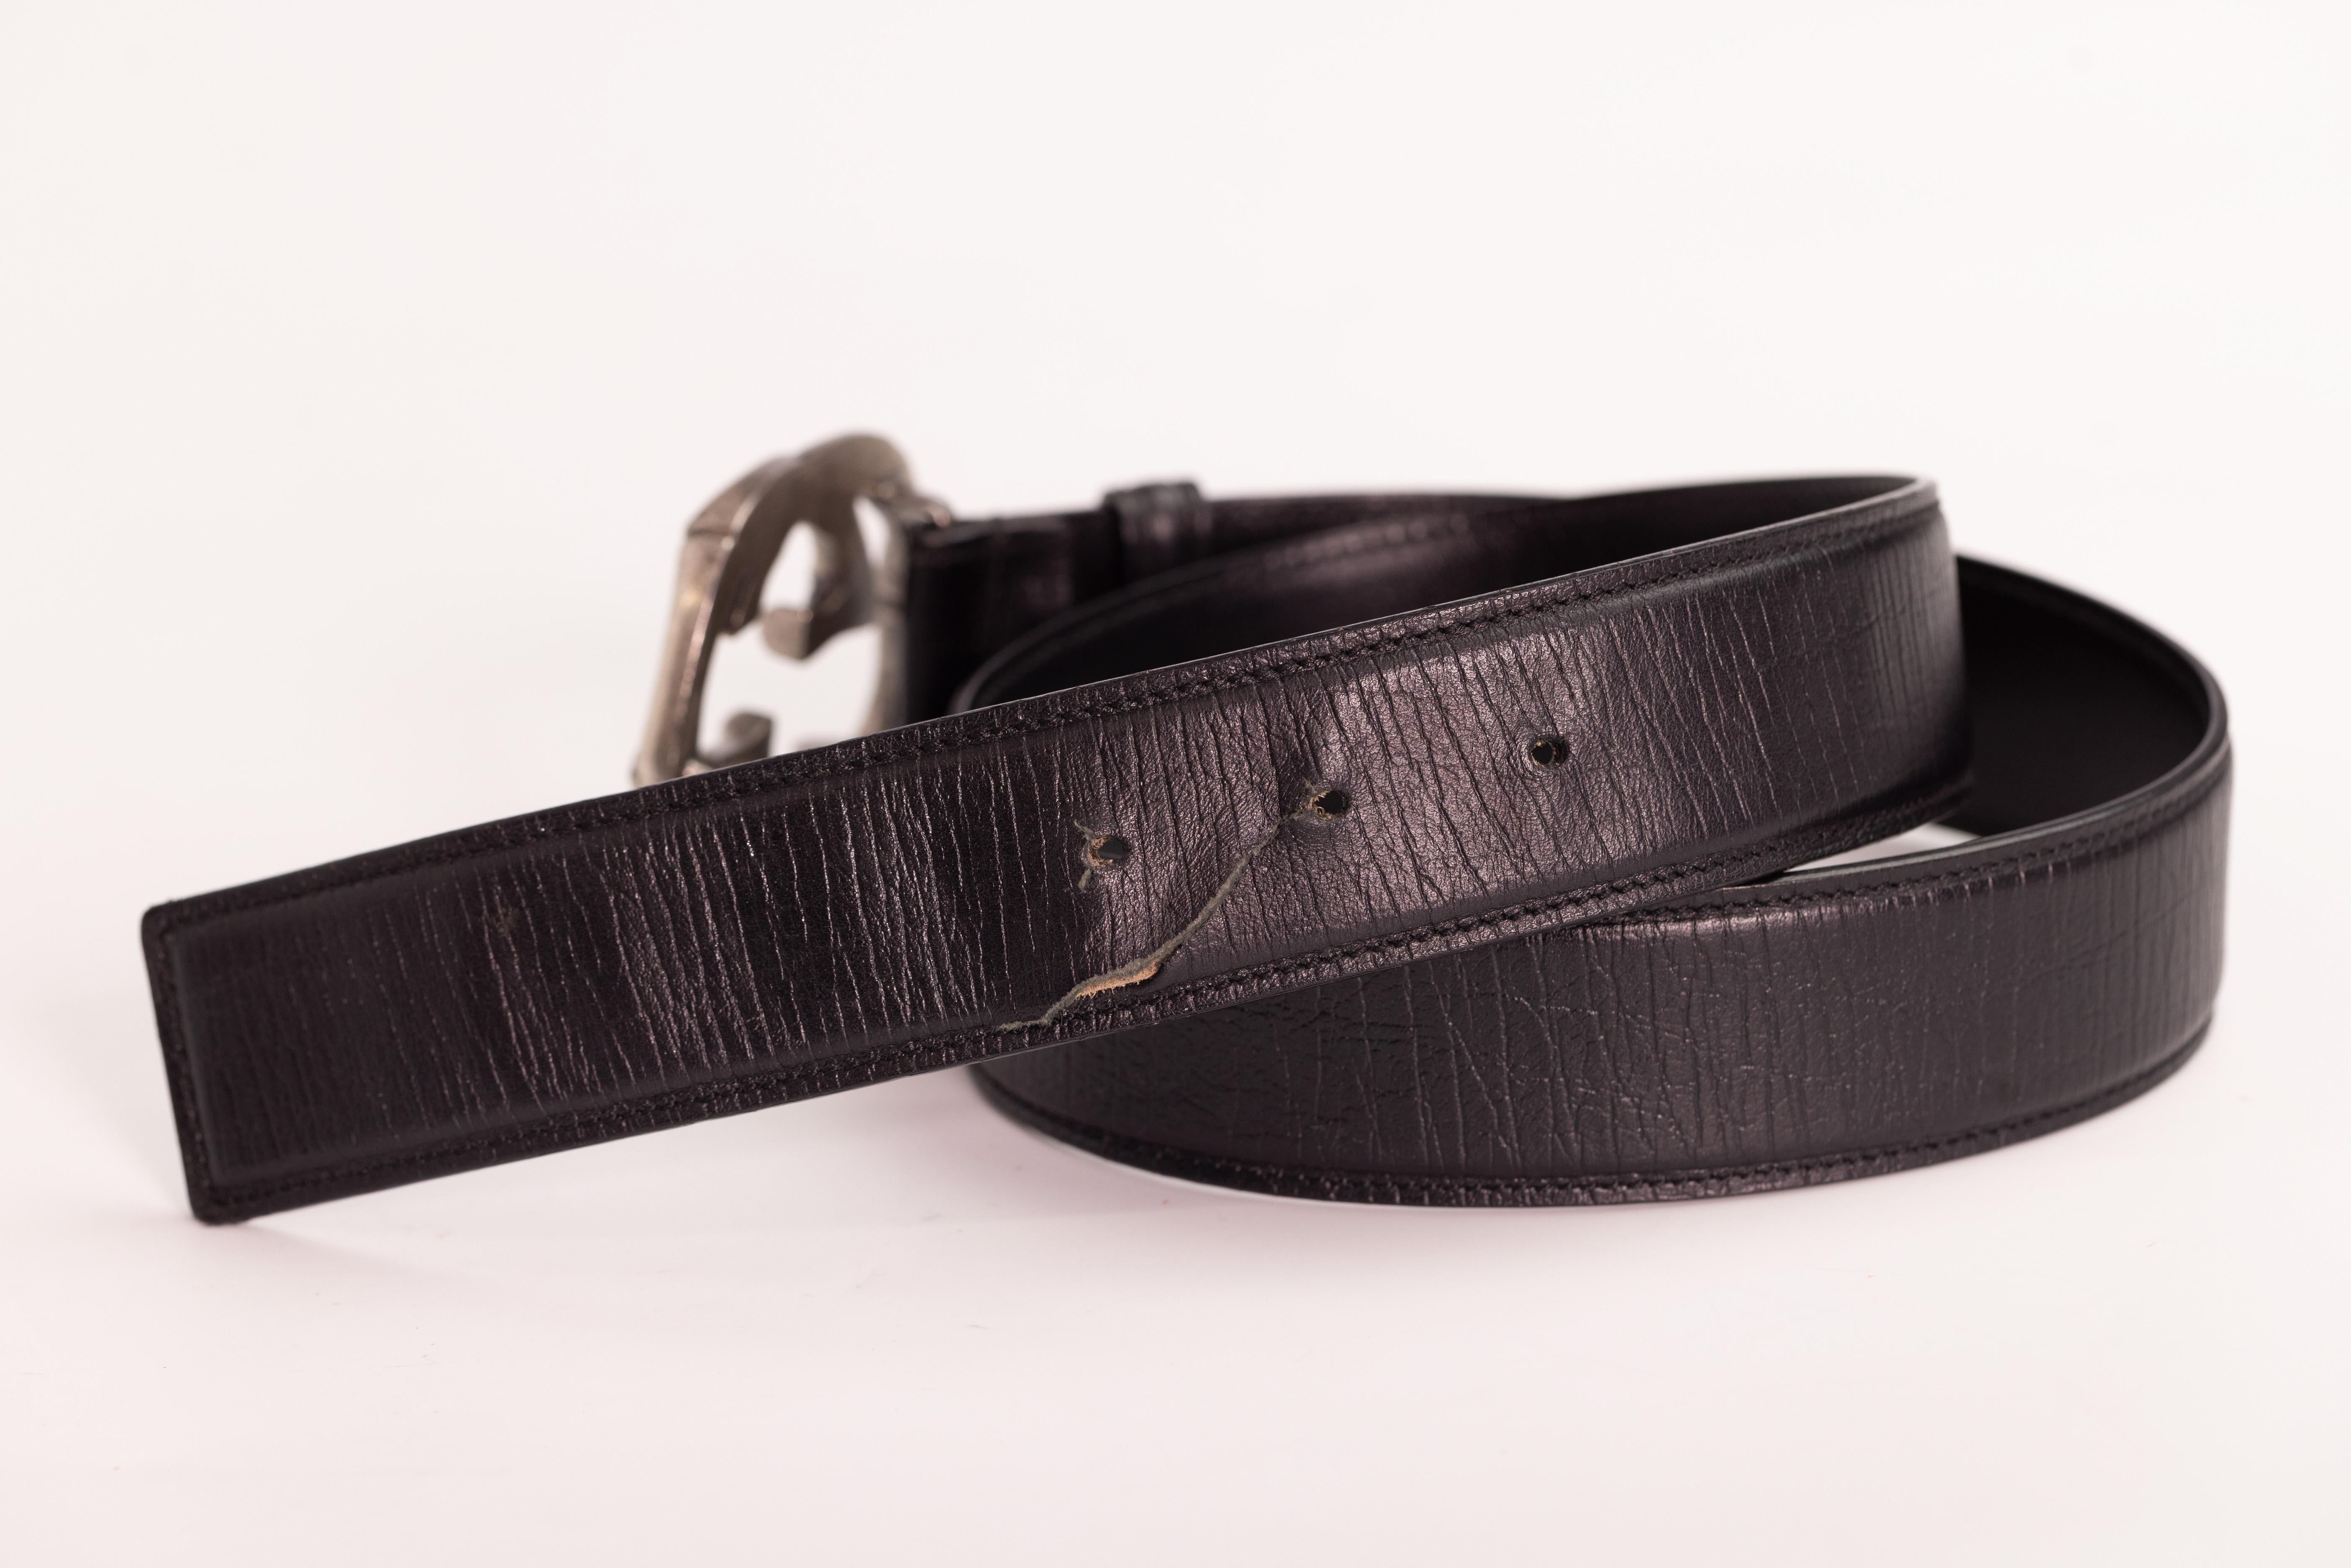 Gucci belt black leather.  Interlocking gg logo buckle with gunmetal hardware. Bamboo accents. Peg-in-hole closure.

Color: Black
Material: Leather with bamboo 
Model No.: 146438
Size: 80 cm / 32 inch
Measures: L 35,5” x W 1.5”
Comes With: No brand